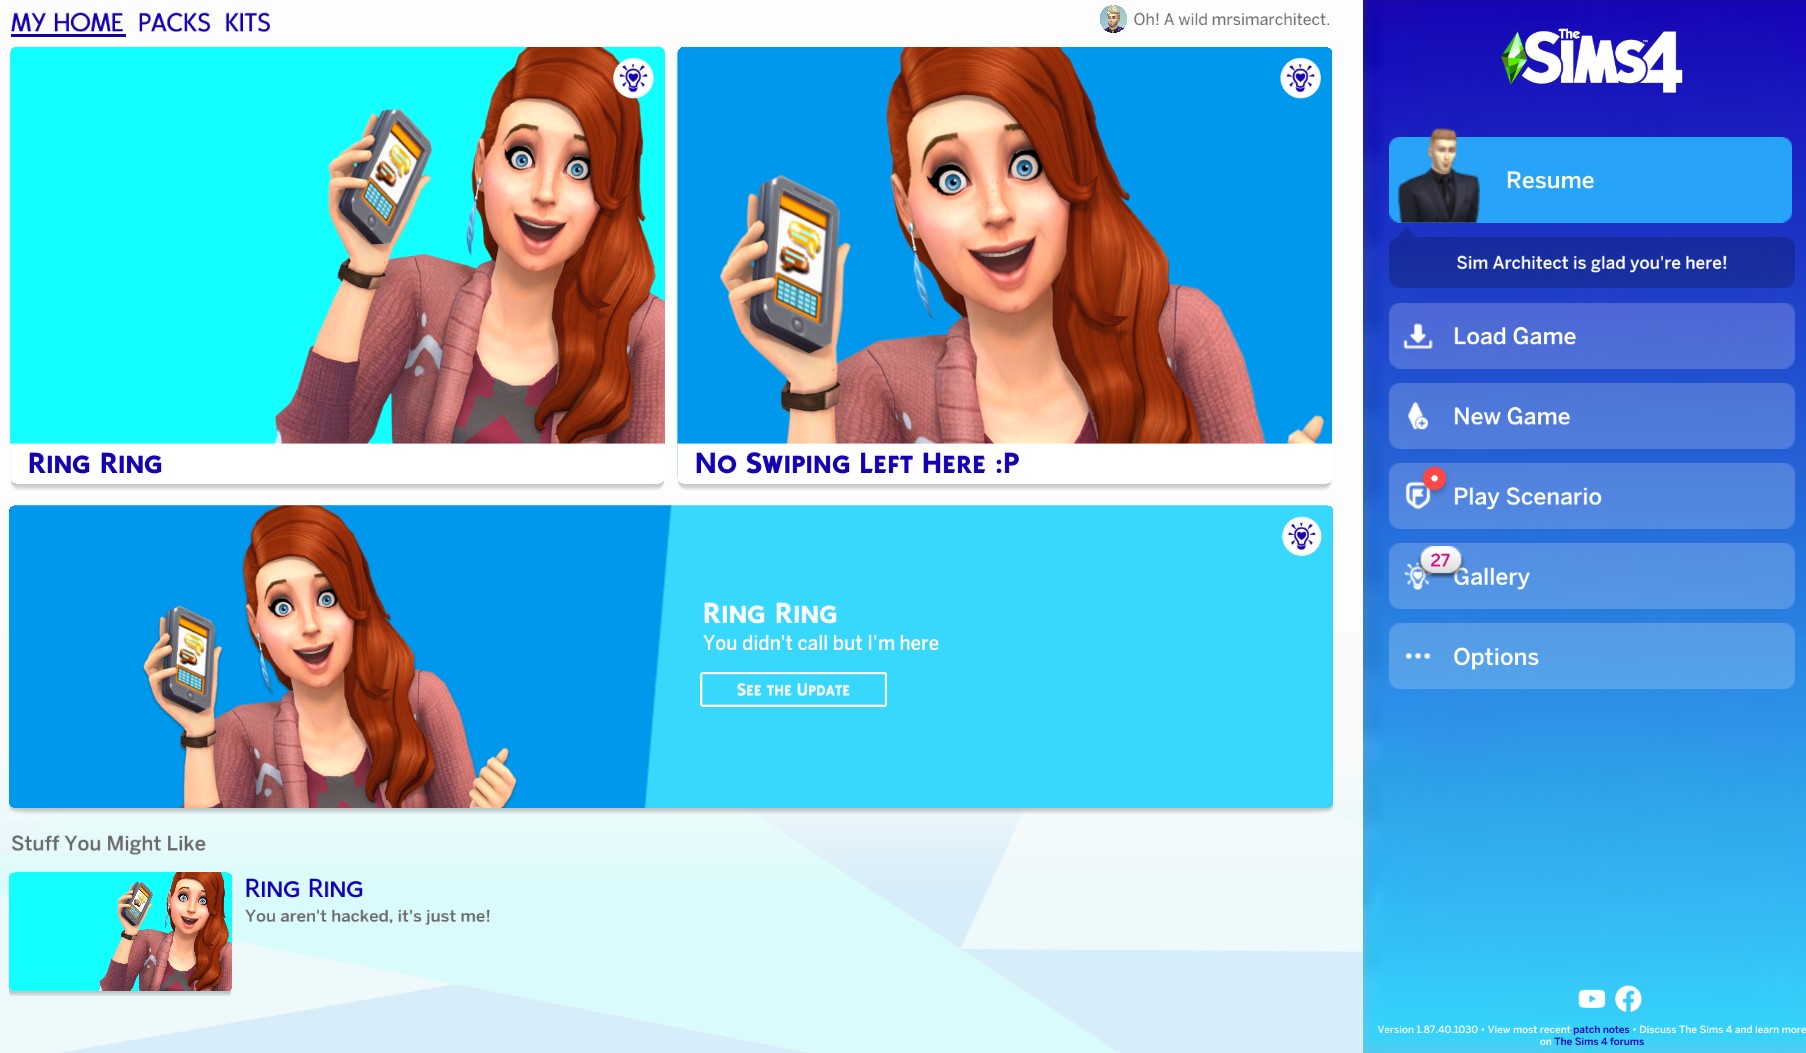 The Sims 4 1.87.40.1030 Ring Ring Surprise Update - April 26, 2022 - New Welcome Screen - Sim Architect is glad you're here!